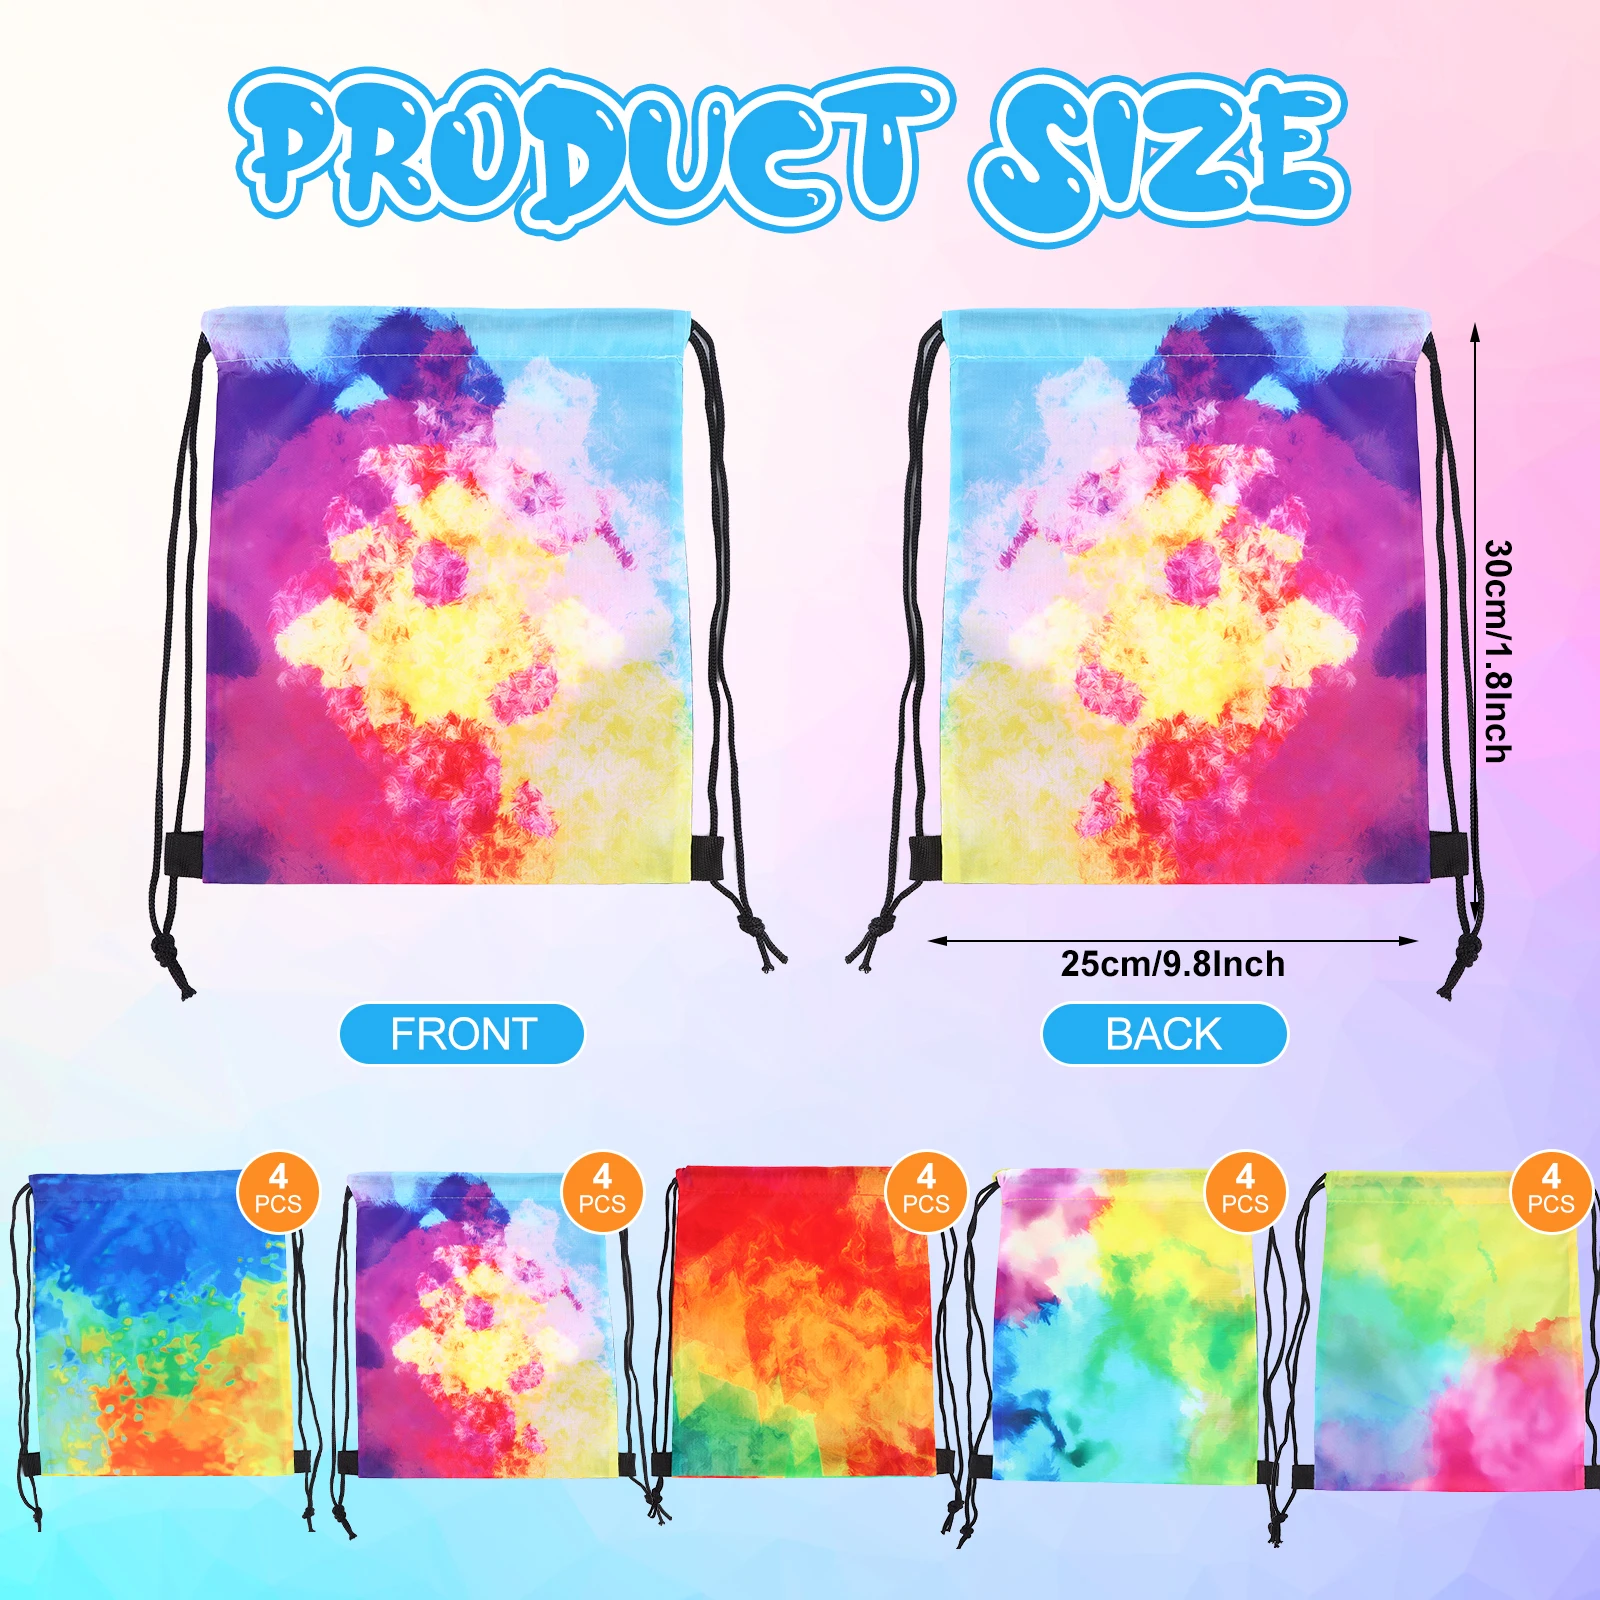 

20 Pack Tie Dye Drawstring Backpack Bag Colorful Gym Sack Water Resistant Polyester Cinch Bag For Outdoor Yoga Travel Swim